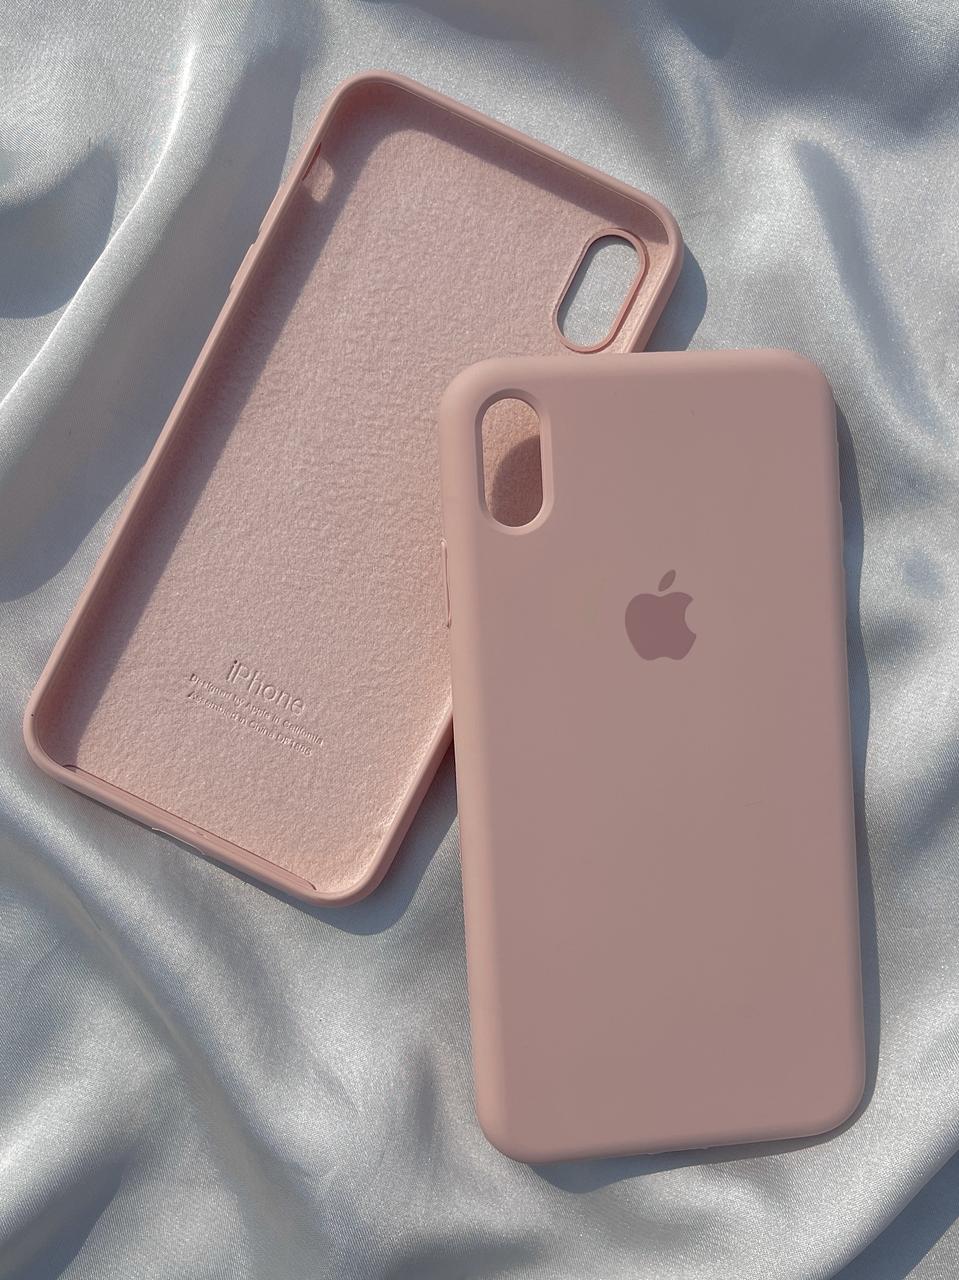 iPhone "XS Max" Silicone Case "Light Skin"